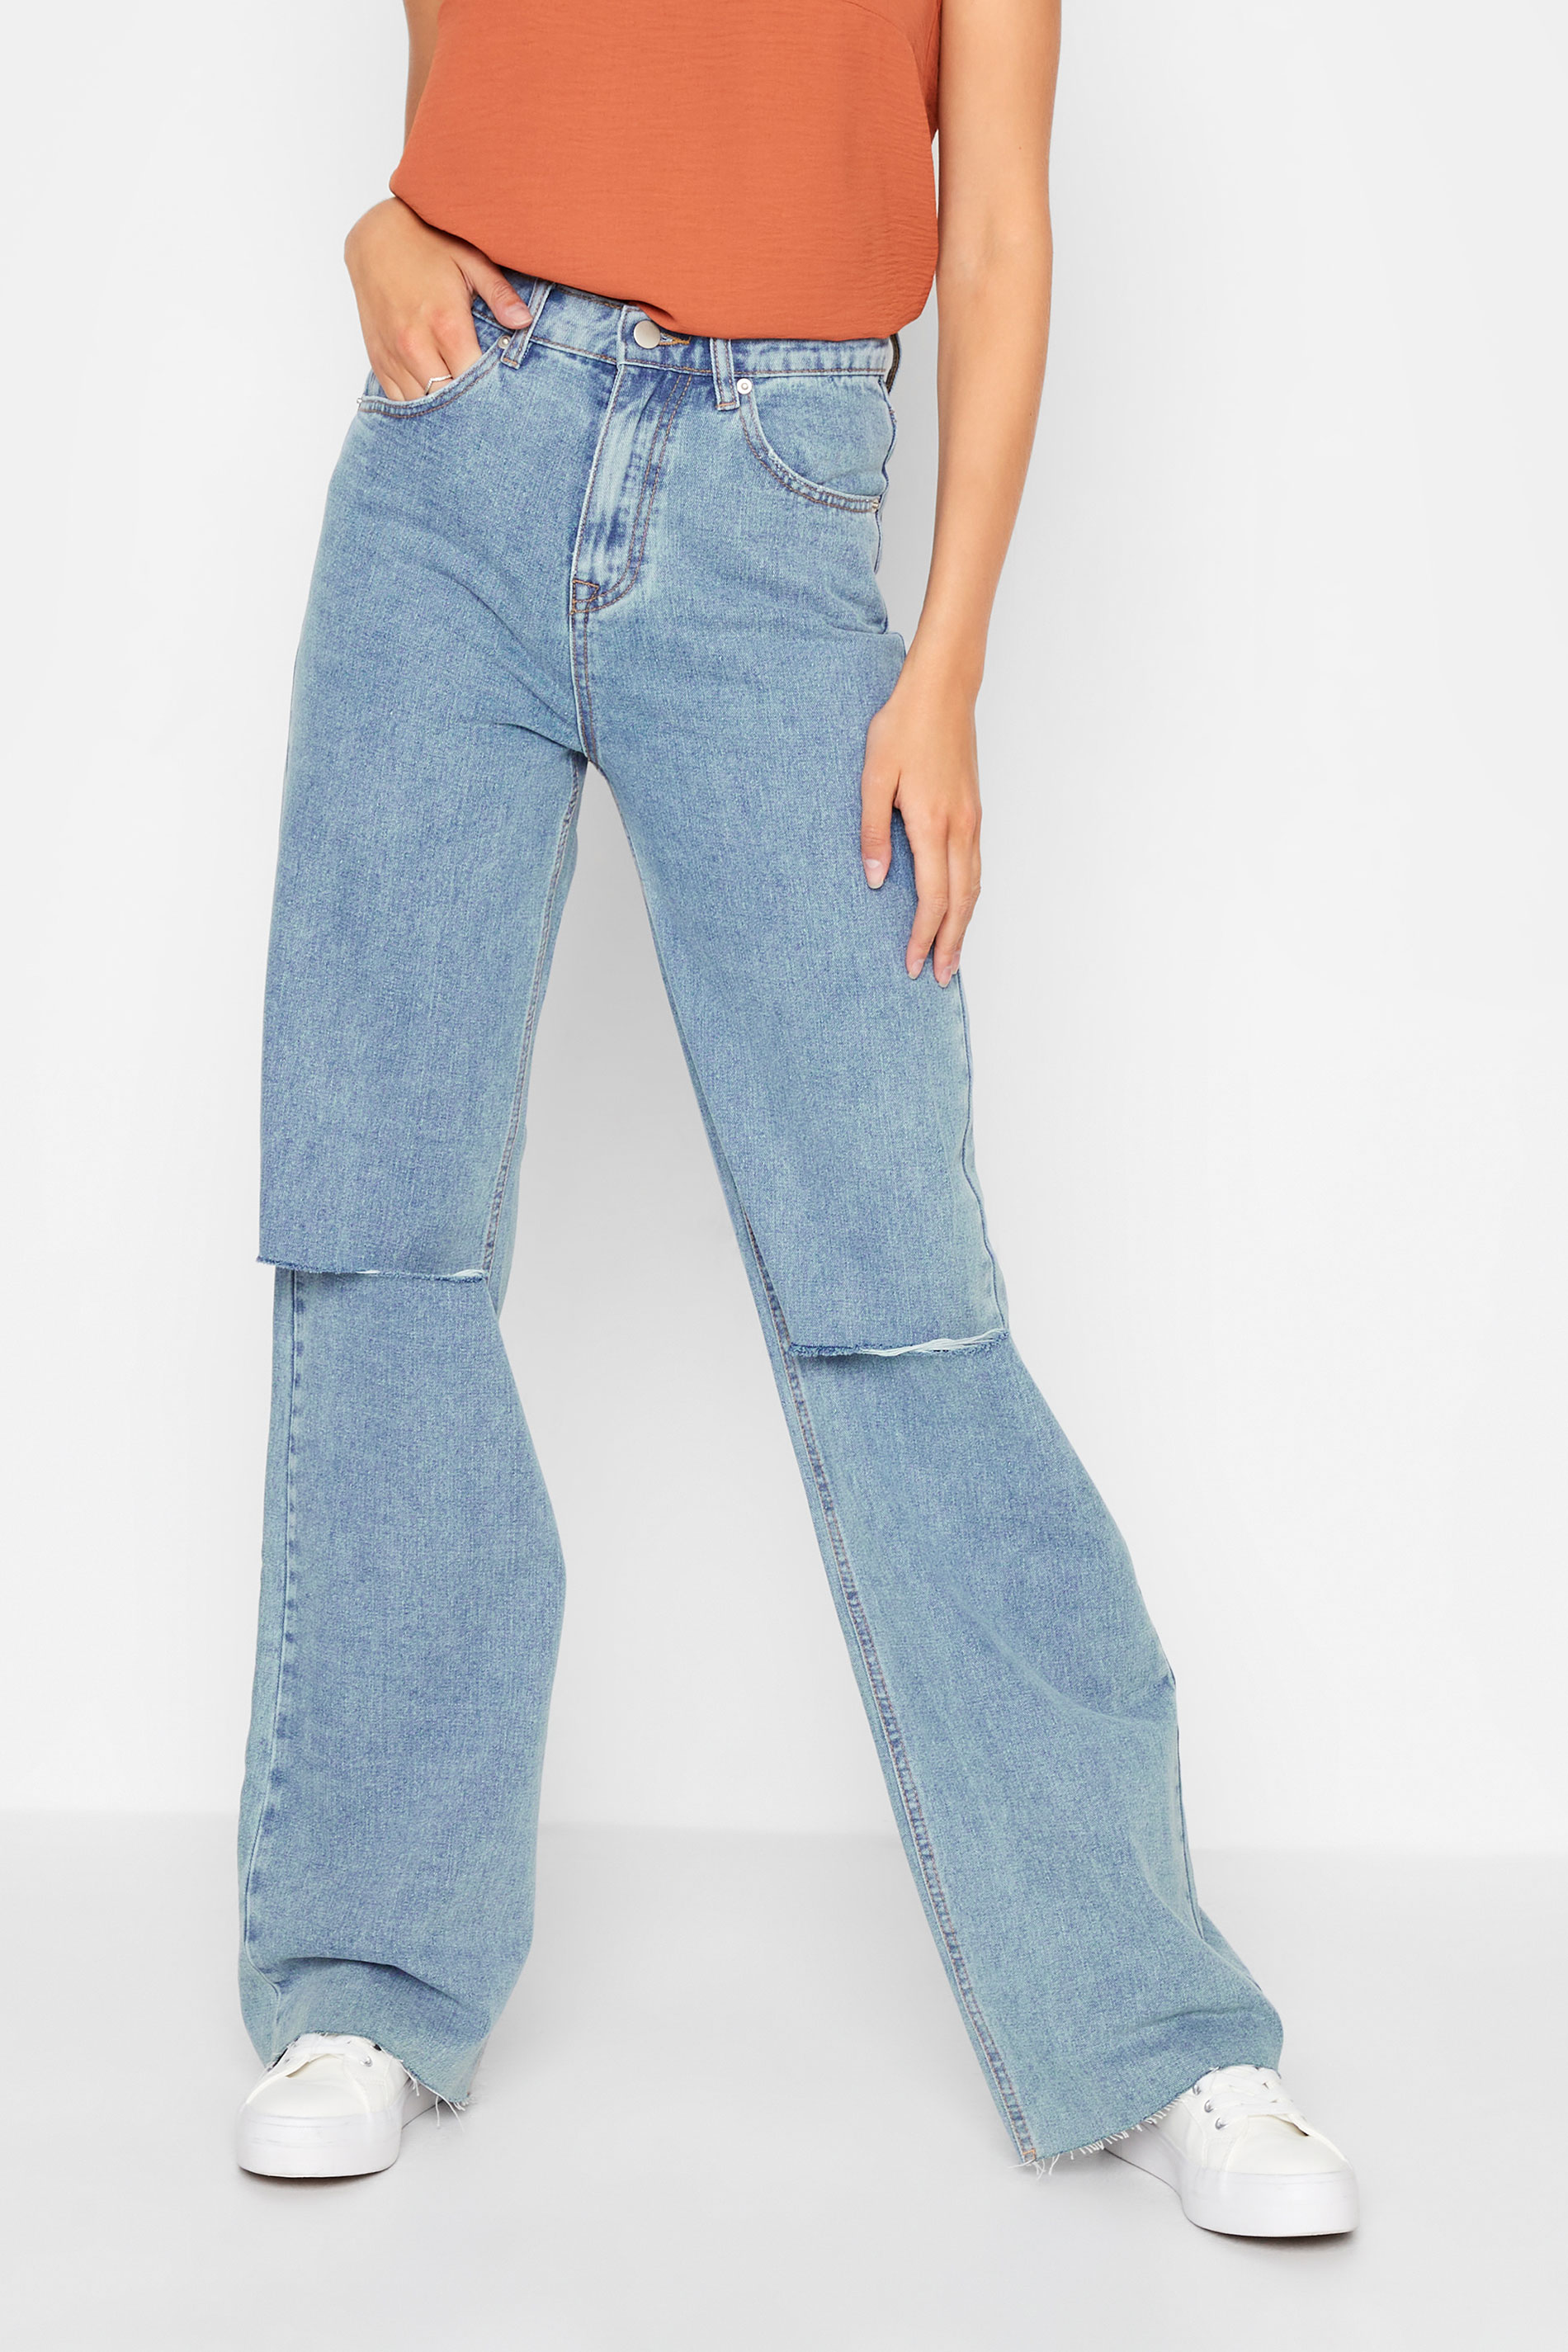 LTS Tall Blue Ripped Knee High Rise Jeans 1